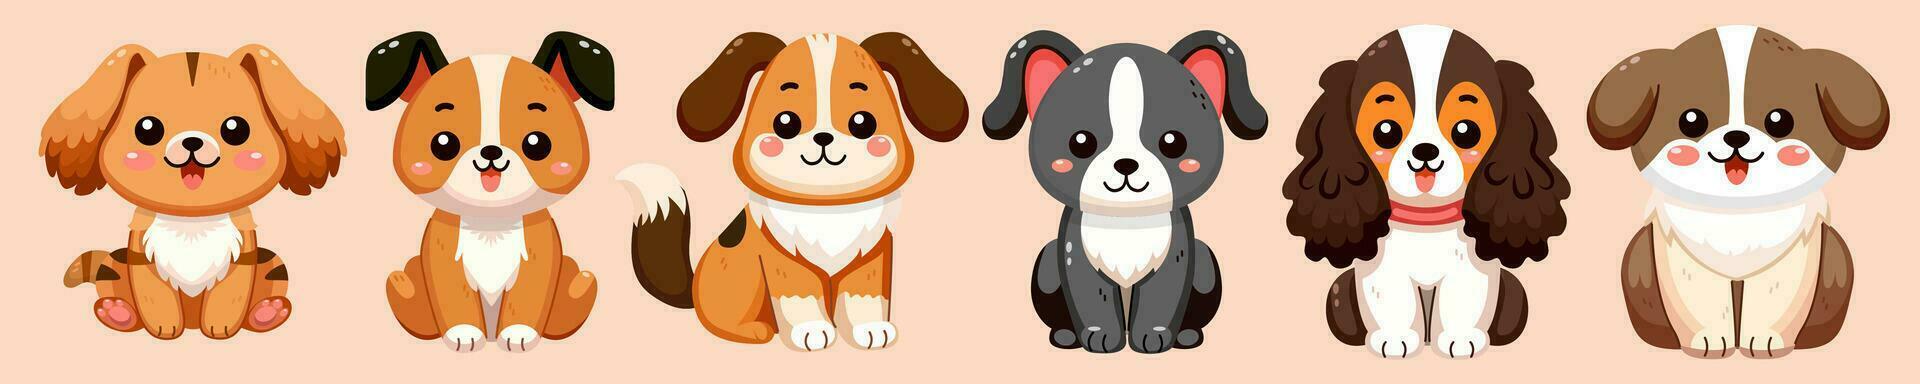 Collection of funny adorable dogs vector